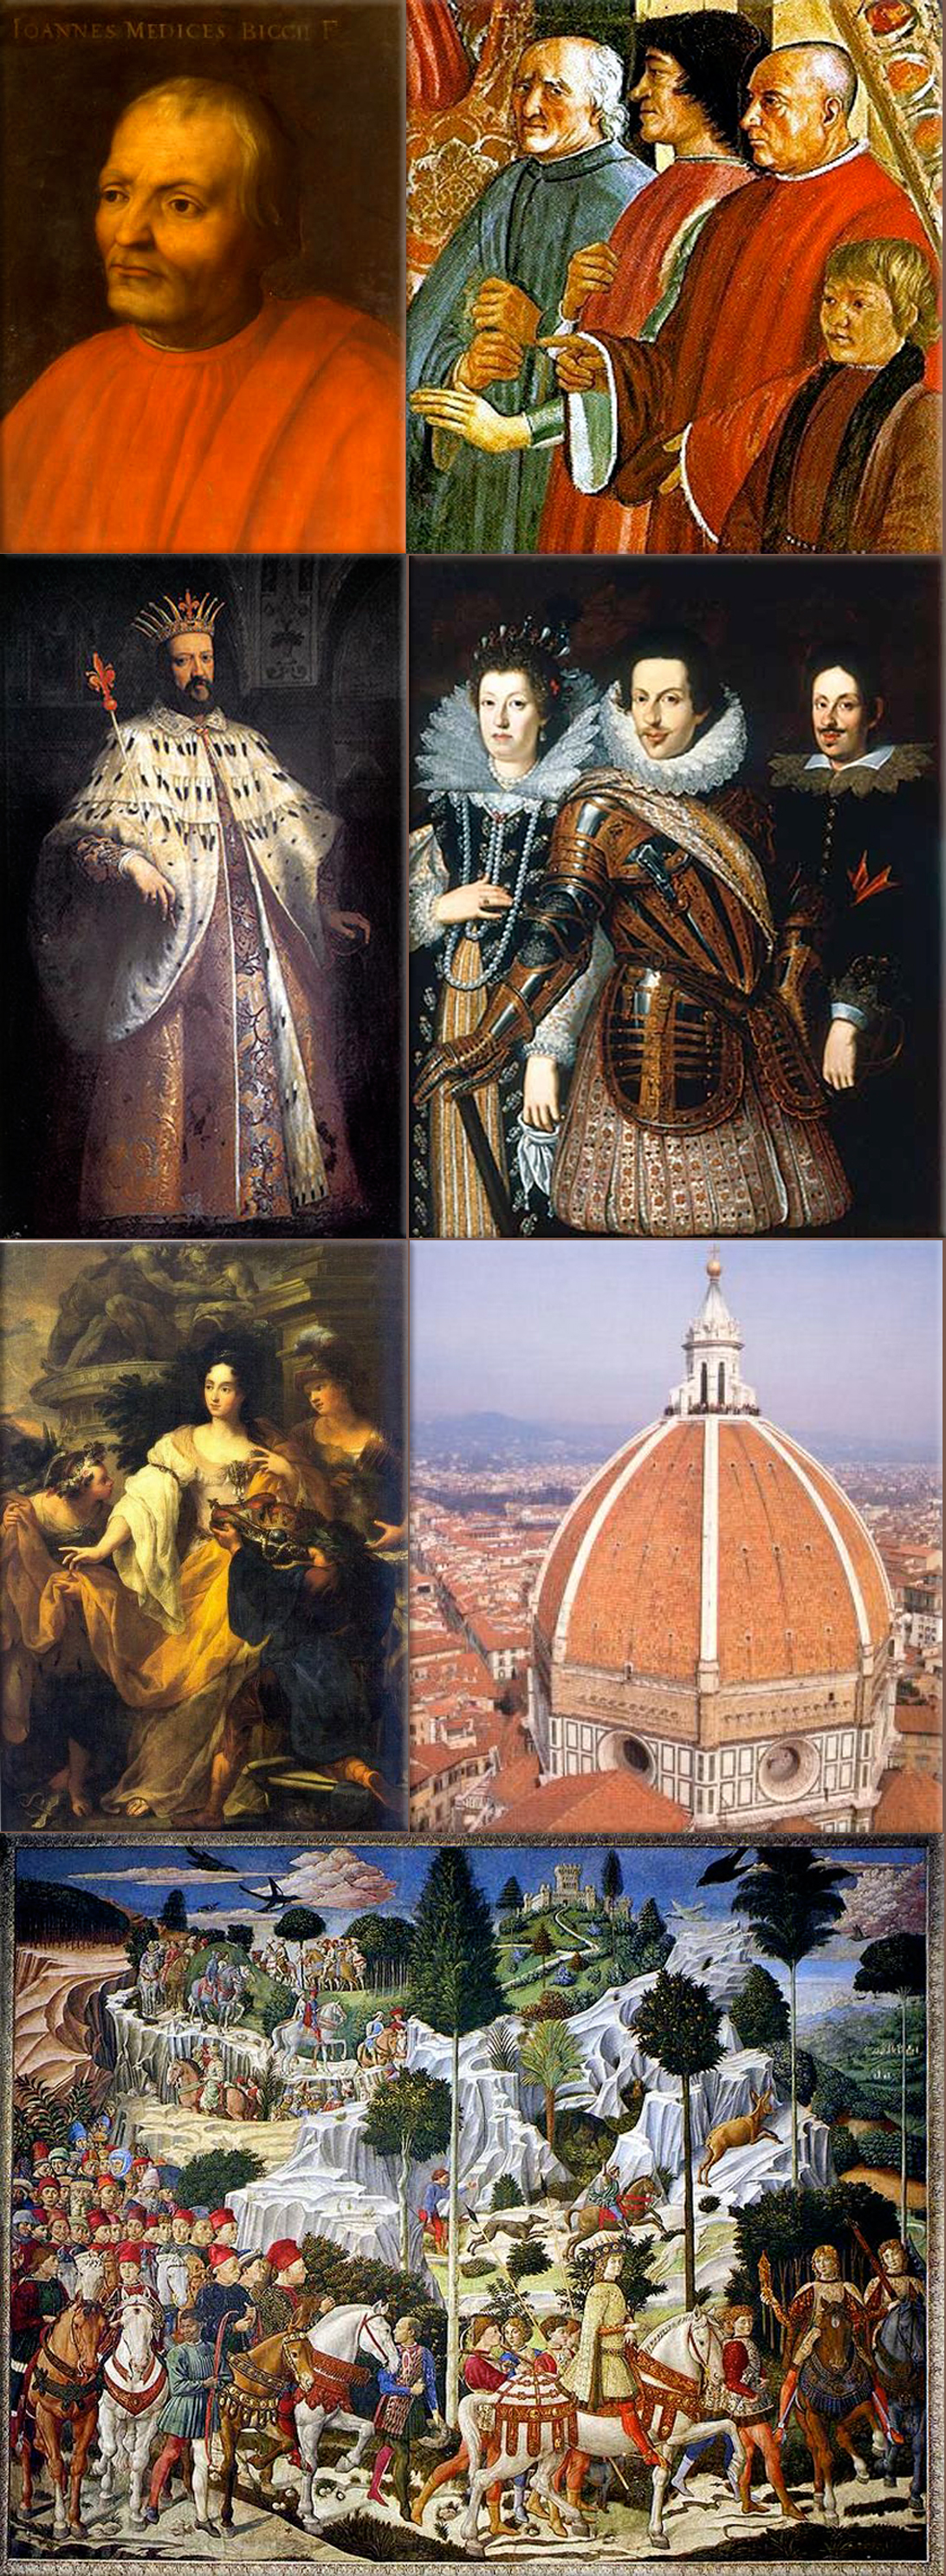 The House of Medici or Famiglia de' Medici was a political dynasty, banking family and later royal house that first began to gather prominence under Cosimo de' Medici in the Republic of Florence during the late 14th century